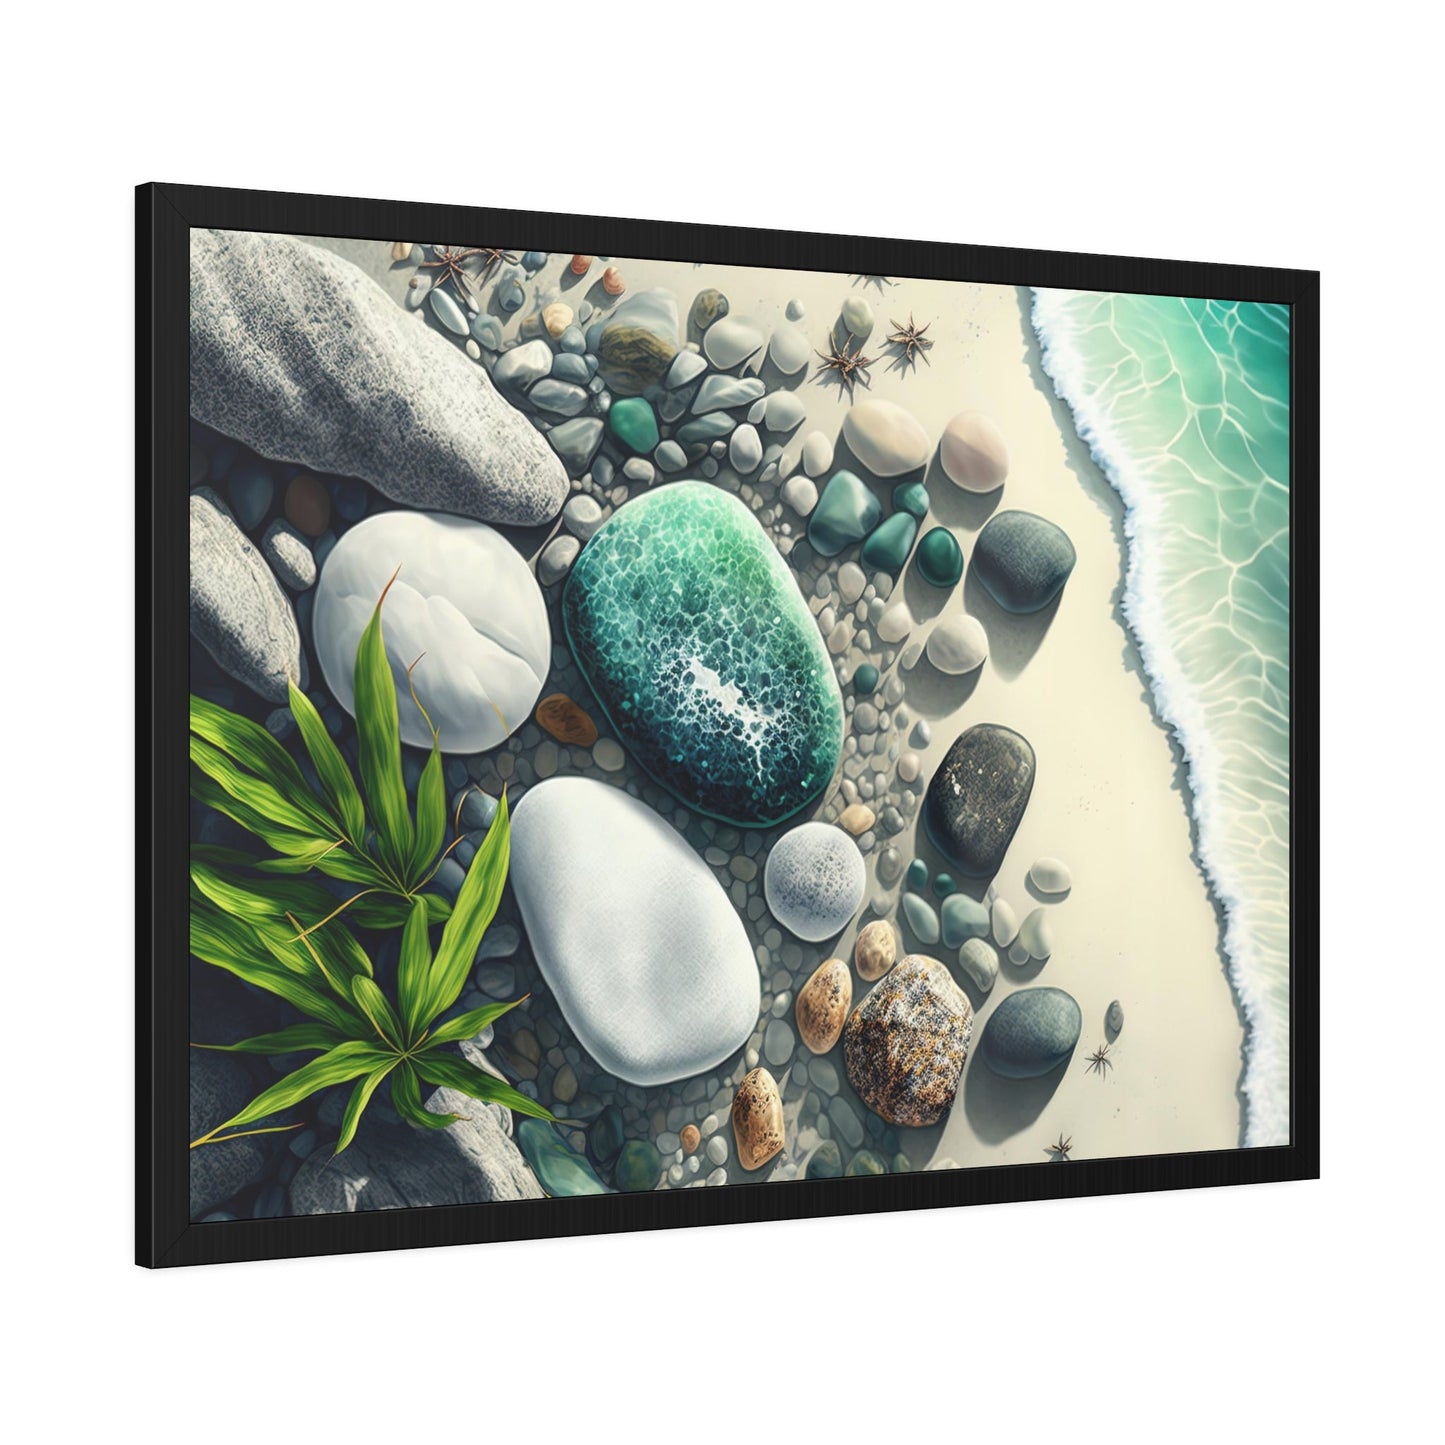 Peaceful Haven: Framed Poster to Bring Relaxation to Your Space